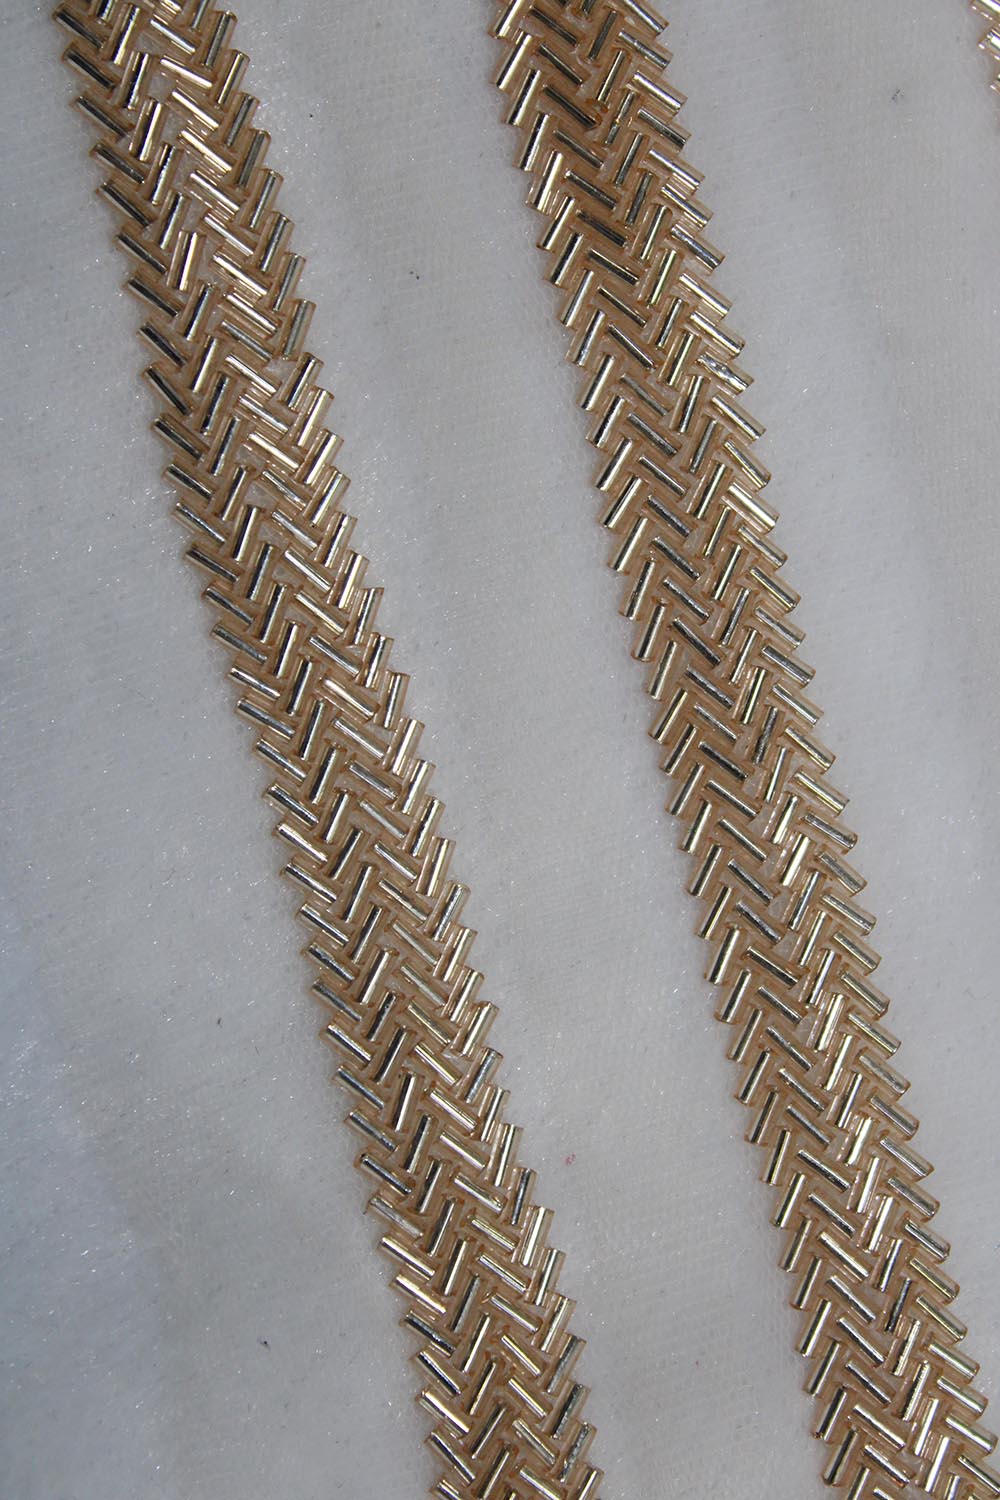 INCREDIBLE True Gold Fringe Fabric -Diagonal Rows for Great Coverage,  Beautiful! - Beautiful Textiles